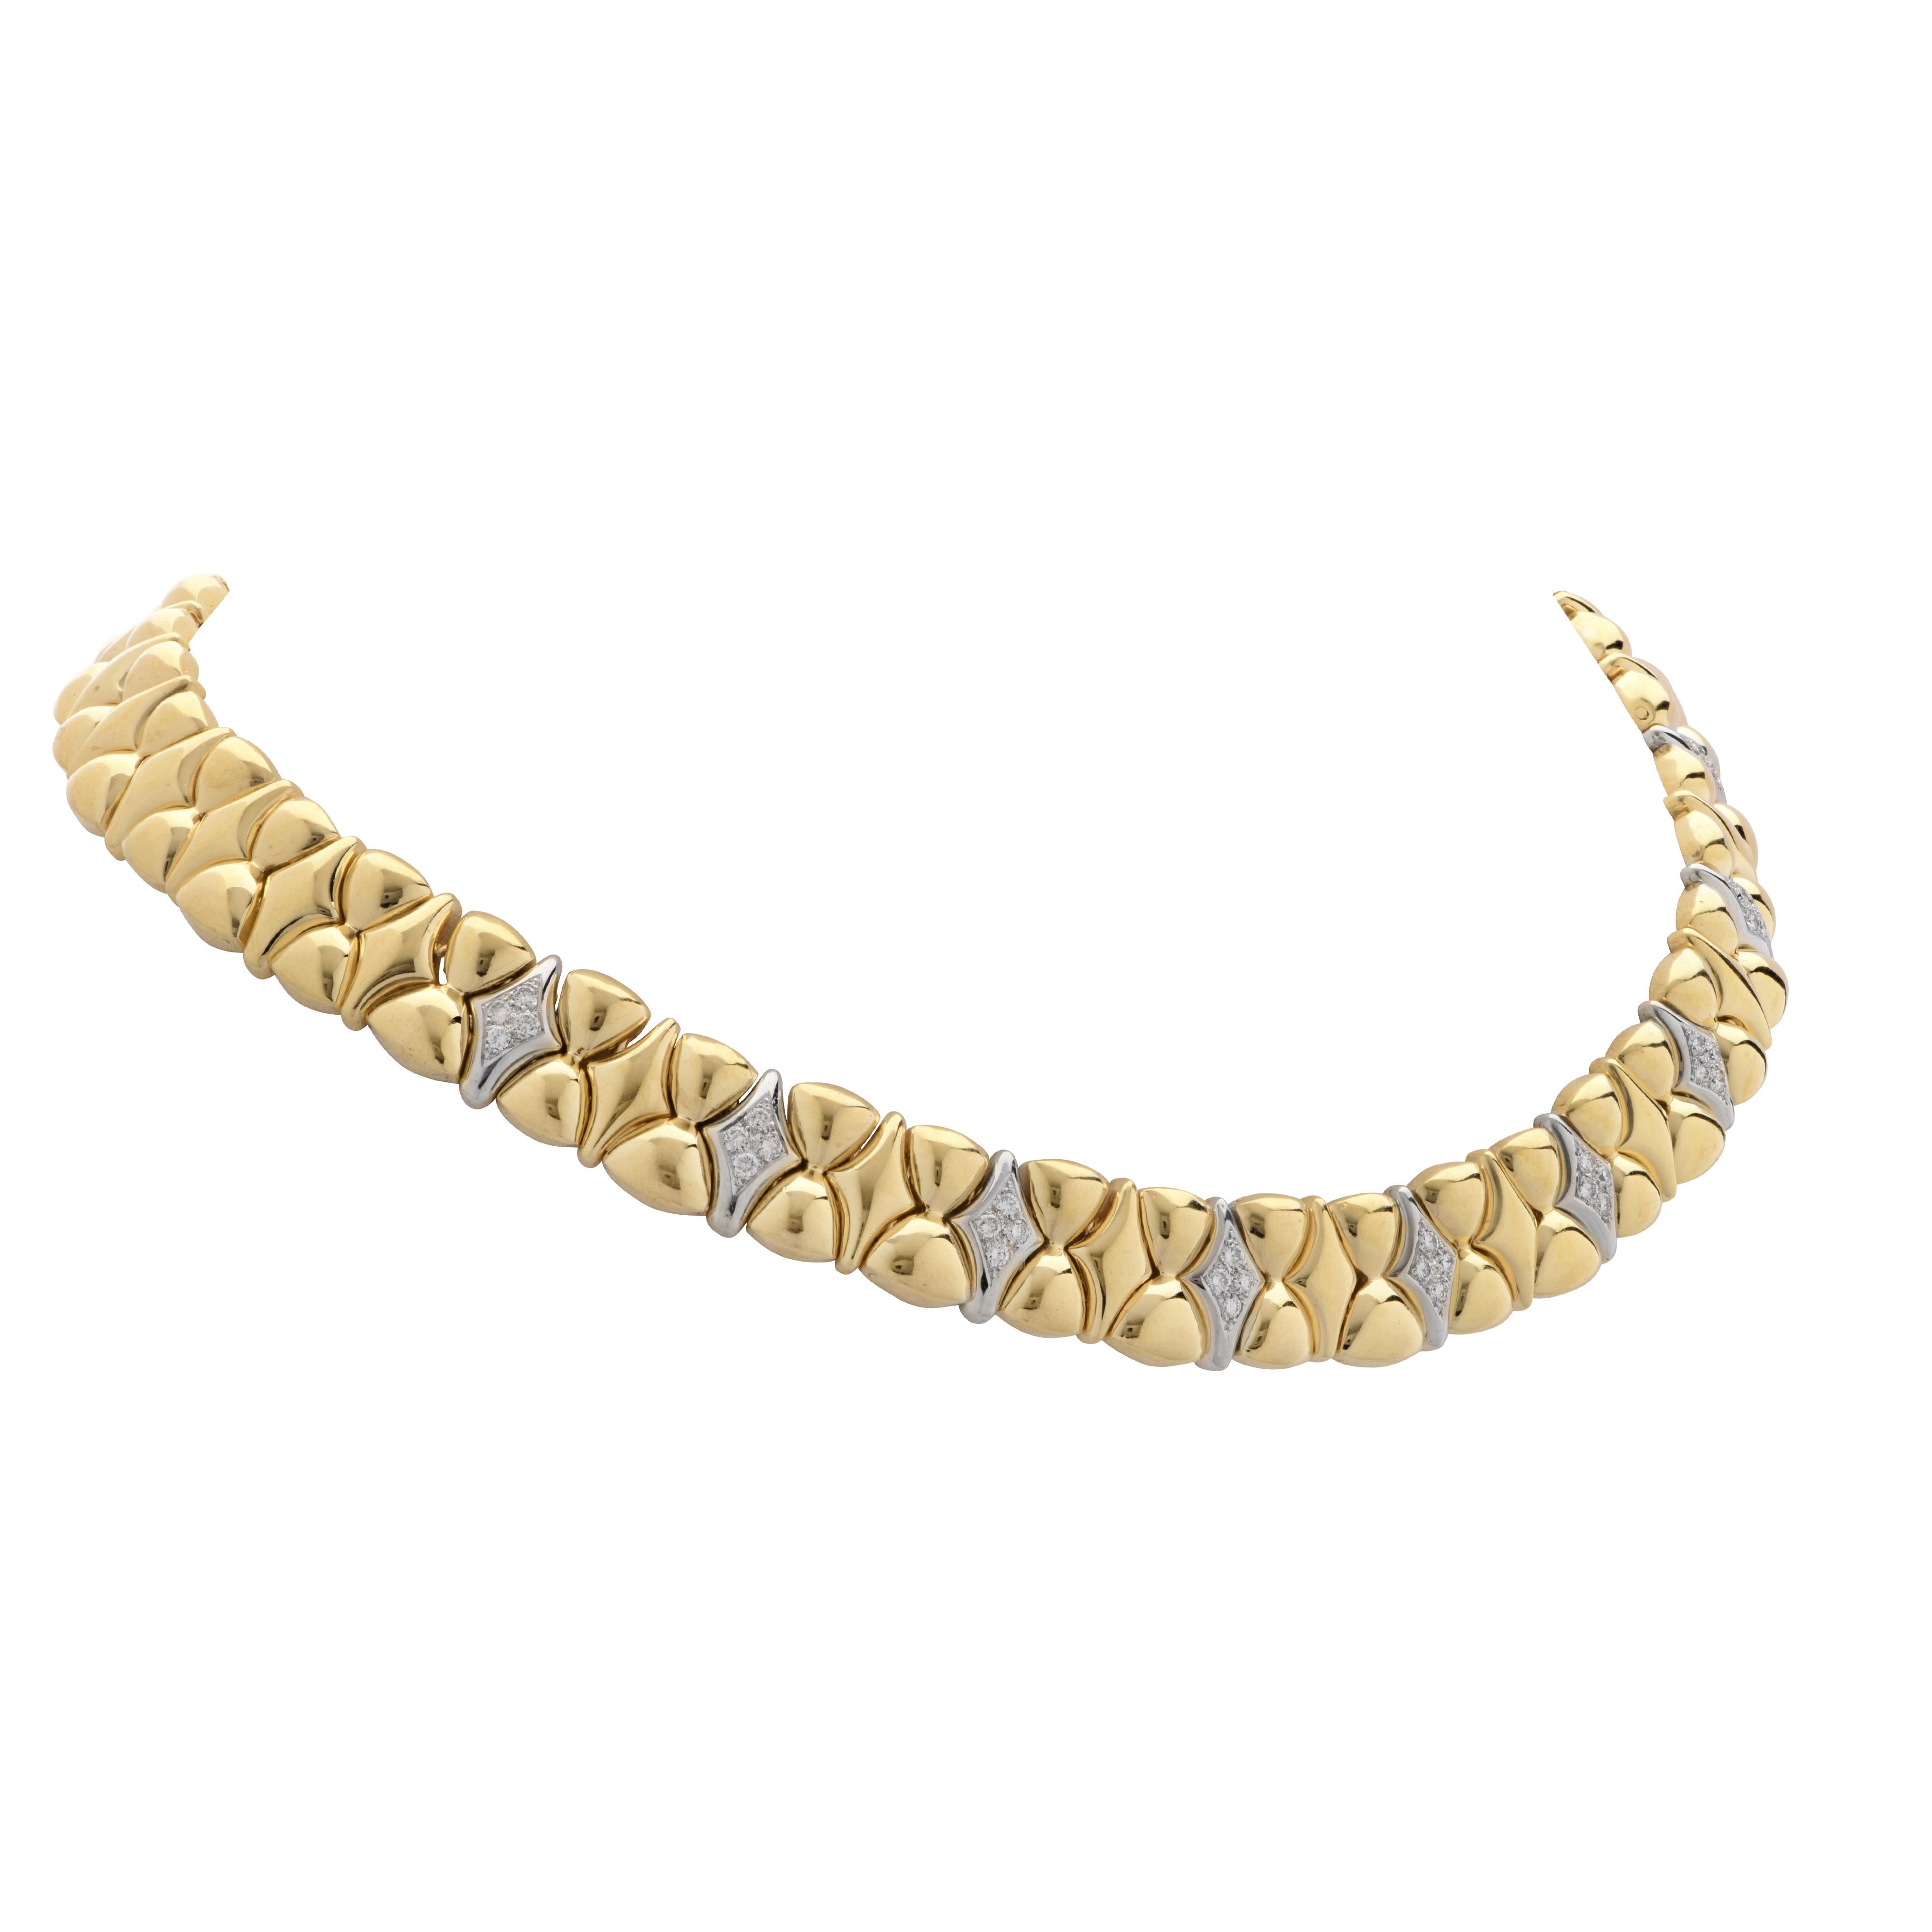 Striking necklace crafted in 18 karat yellow & white gold featuring 36 Round Brilliant cut diamonds weighing 1.25 carats, F color, VS clarity. Gold bows alternate with gold diamond shapes to create this elegant and alluring collar necklace. This